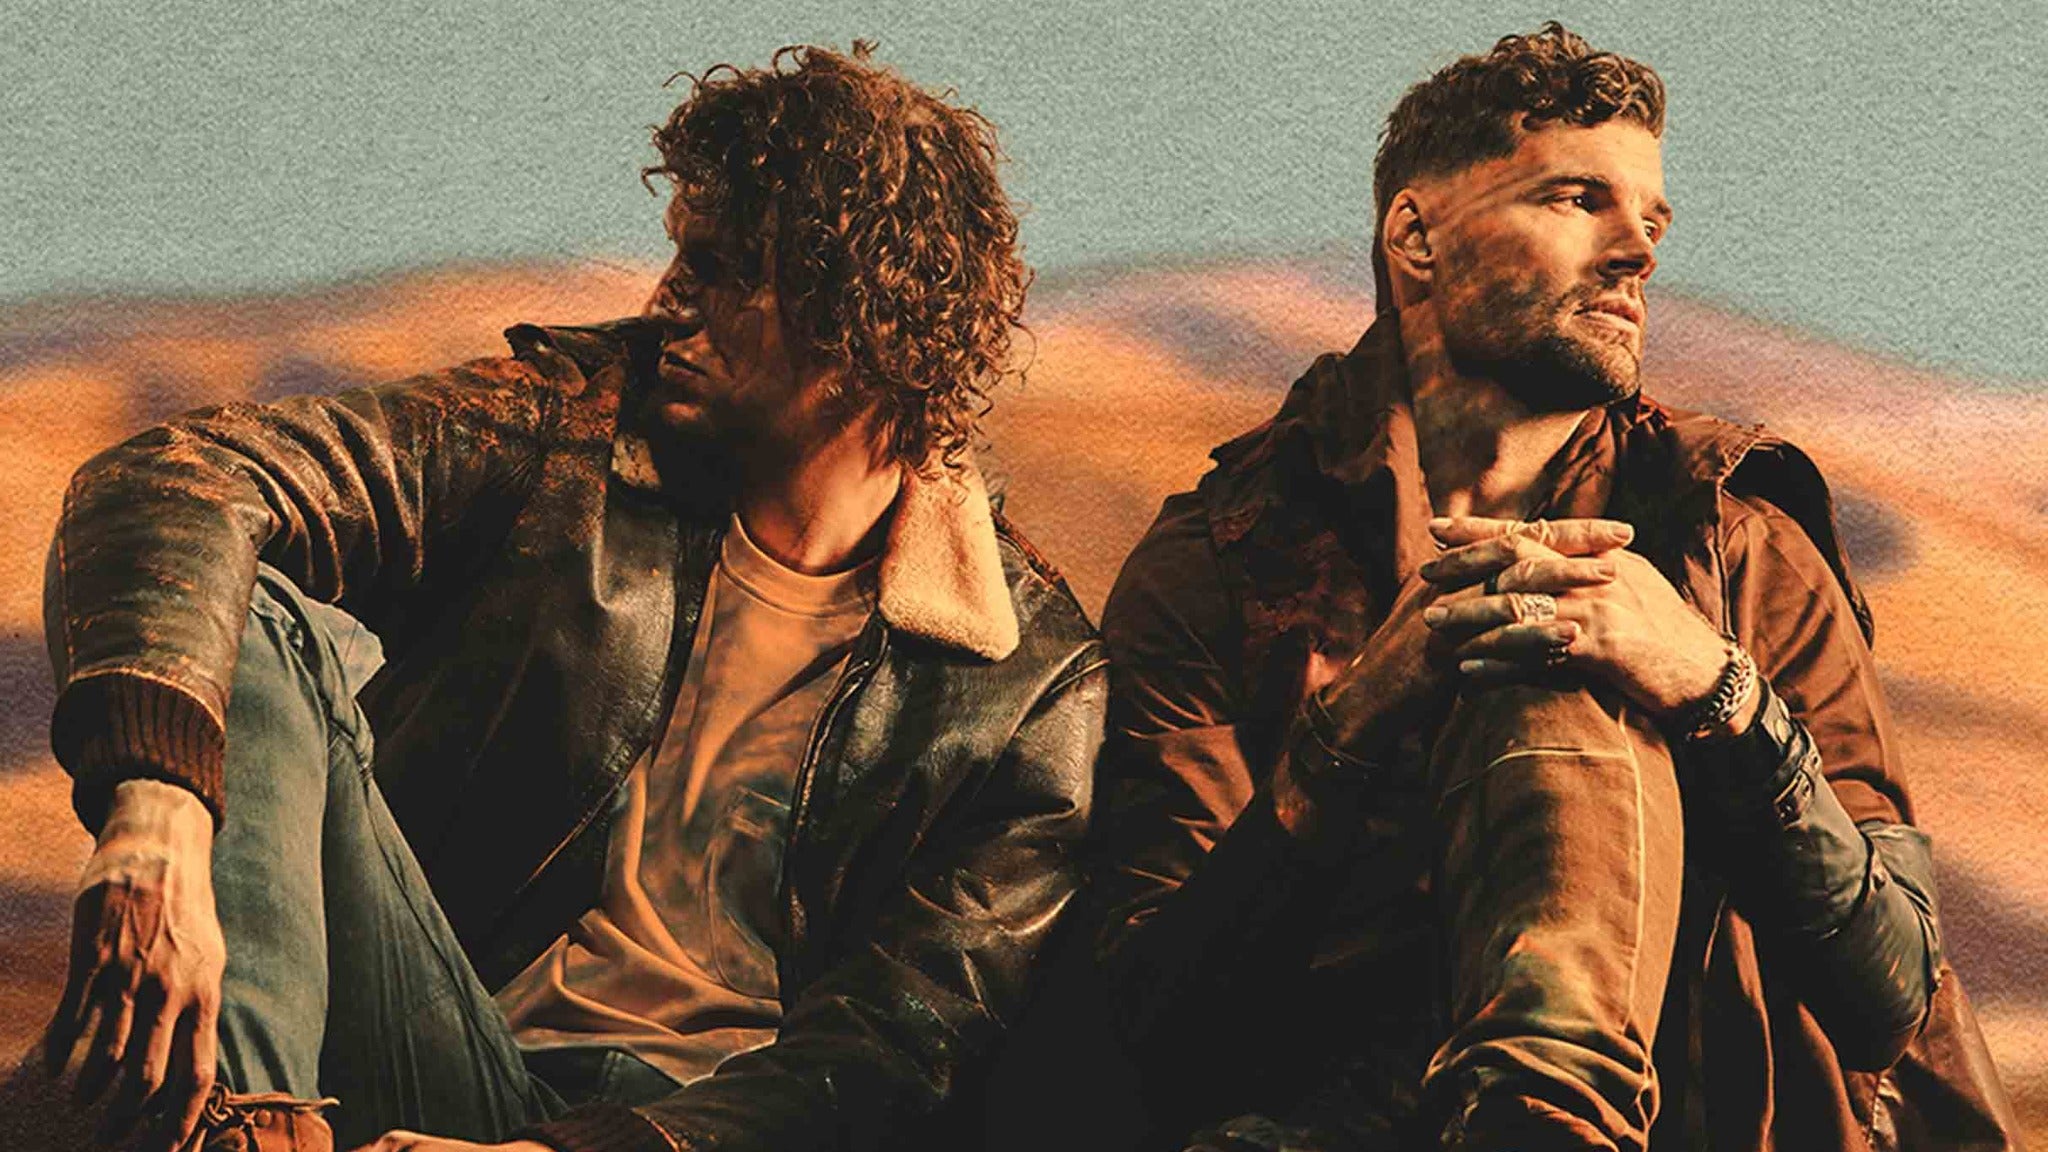 for KING & COUNTRY at Del Mar Fairgrounds